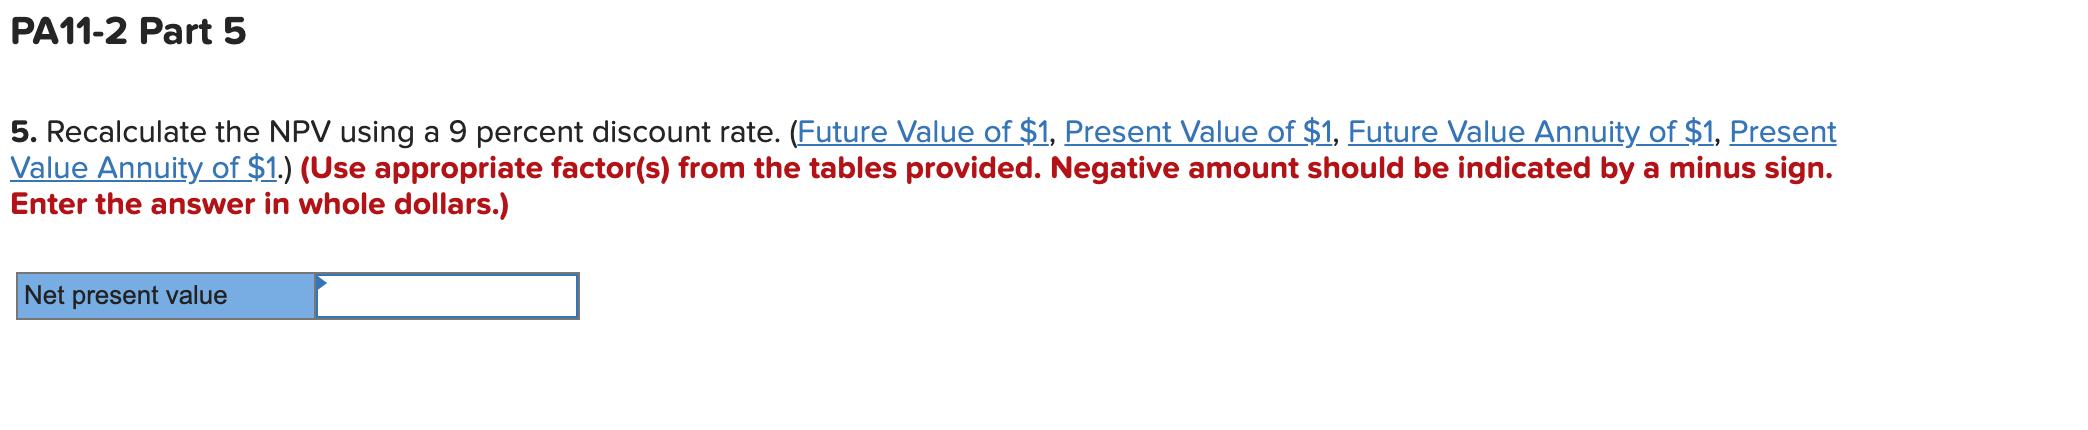 PA11-2 Part 5 5. Recalculate the NPV using a 9 percent discount rate. (Future Value of $1, Present Value of $1, Future Value